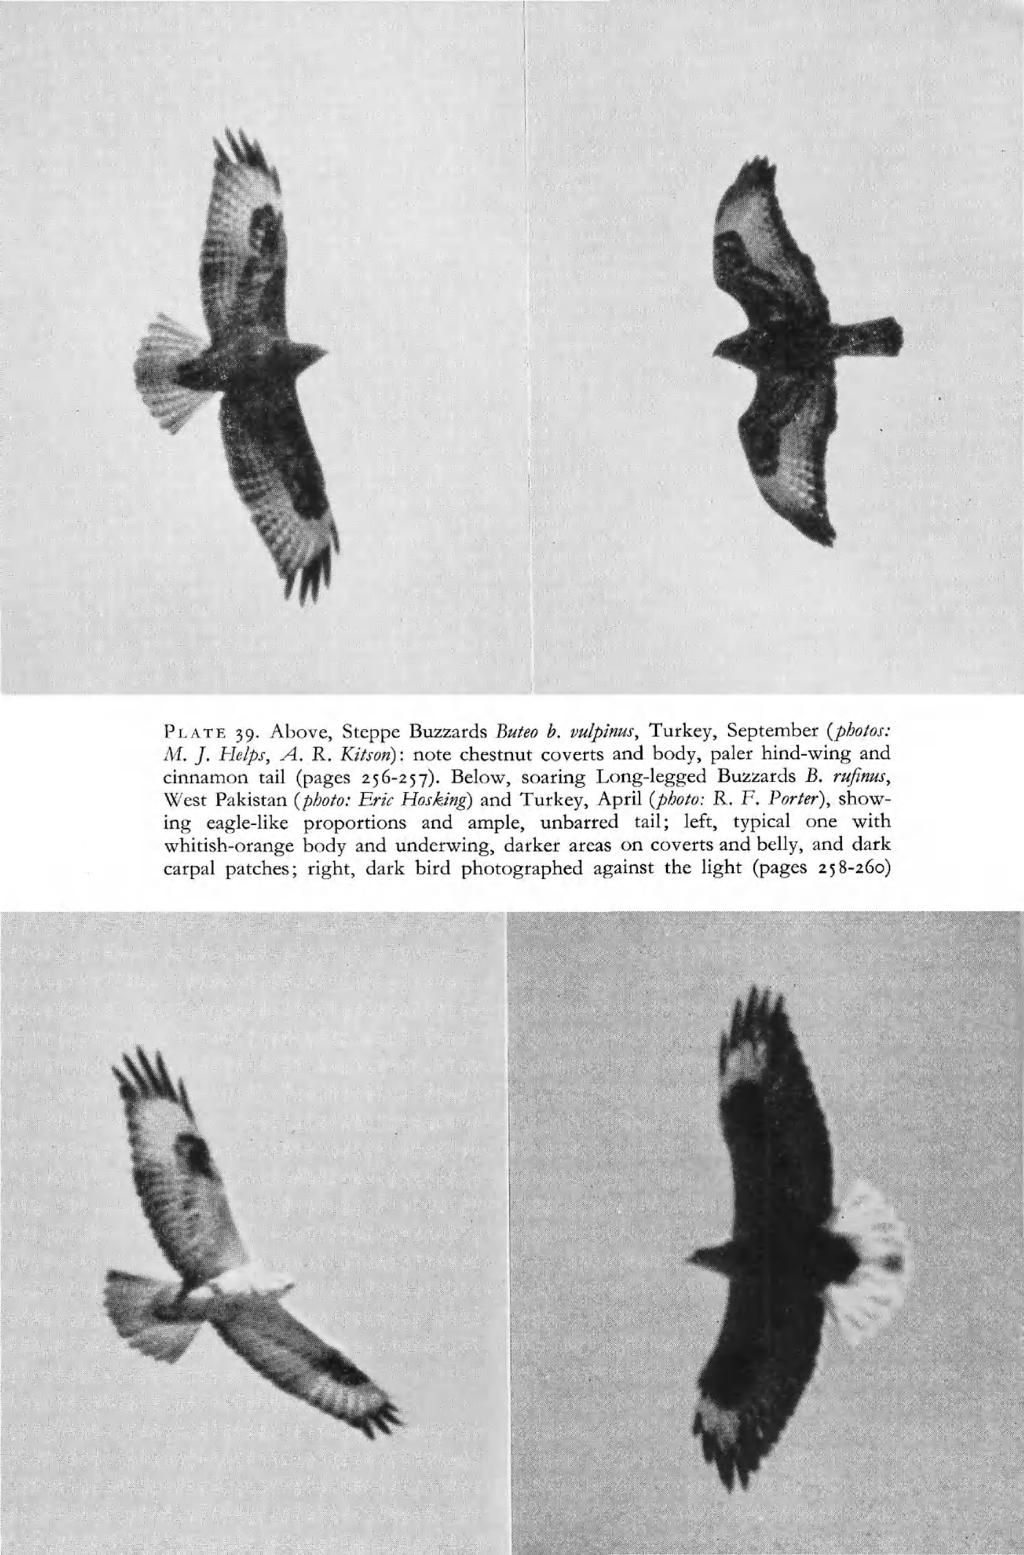 PLATE 39. Above, Steppe Buzzards Buteo b. vulpinus, Turkey, September {photos: M. J. Helps, A. R. Kitson): note chestnut coverts and body, paler hind-wing and cinnamon tail (pages 256-257).